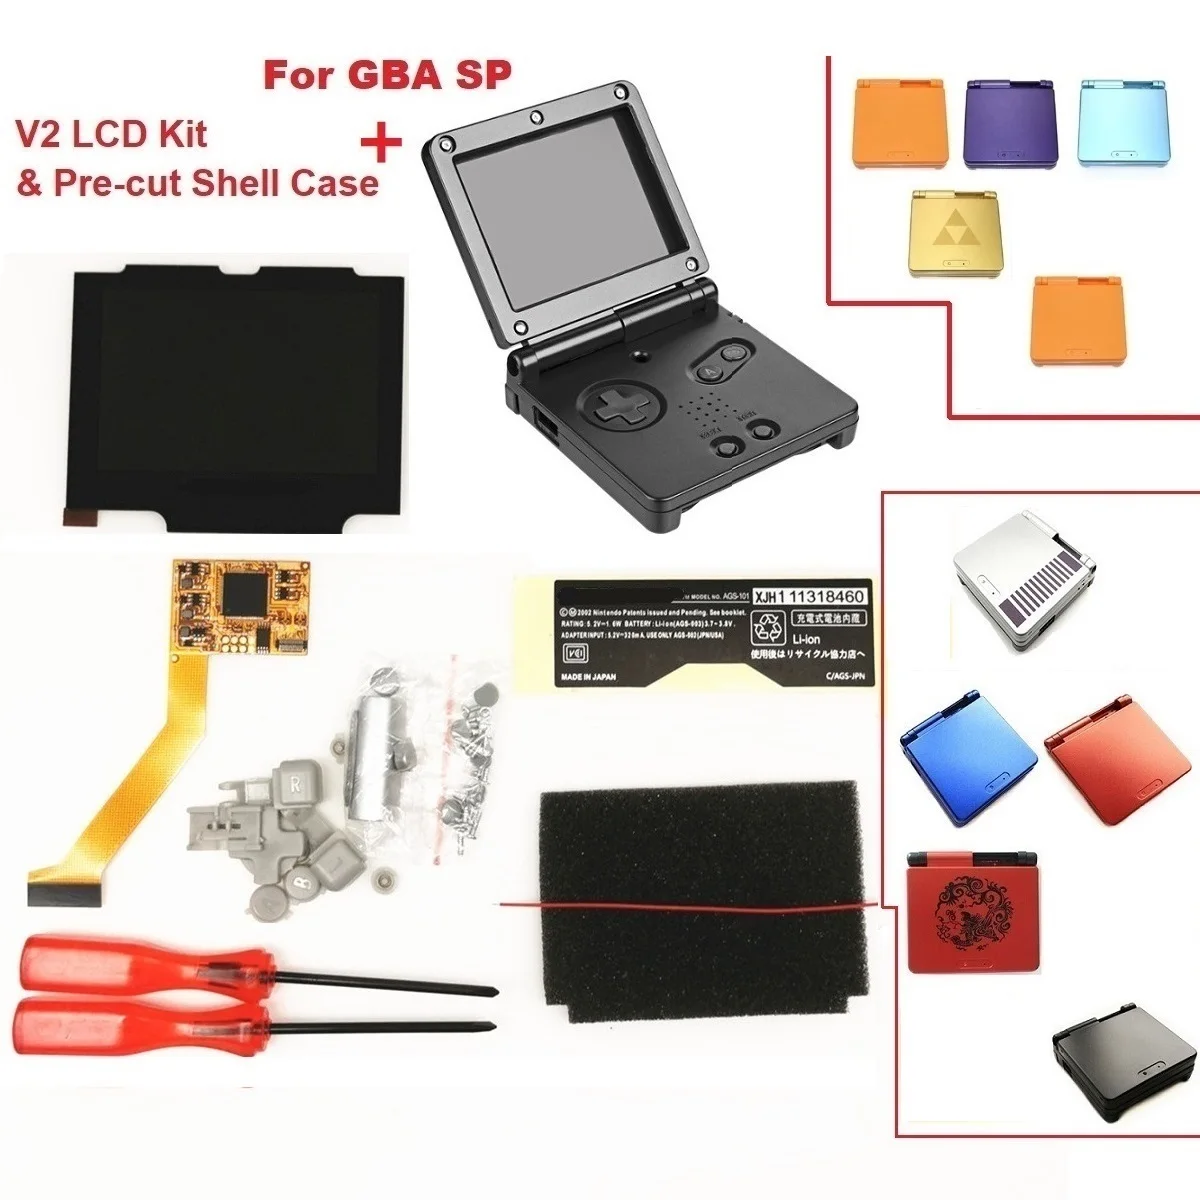 V2 IPS Screen LCD Kits for GBA SP Backlight LCD Screen 5 Levels Brightness V2 Screen For GBA SP Console And pre-cut Shell